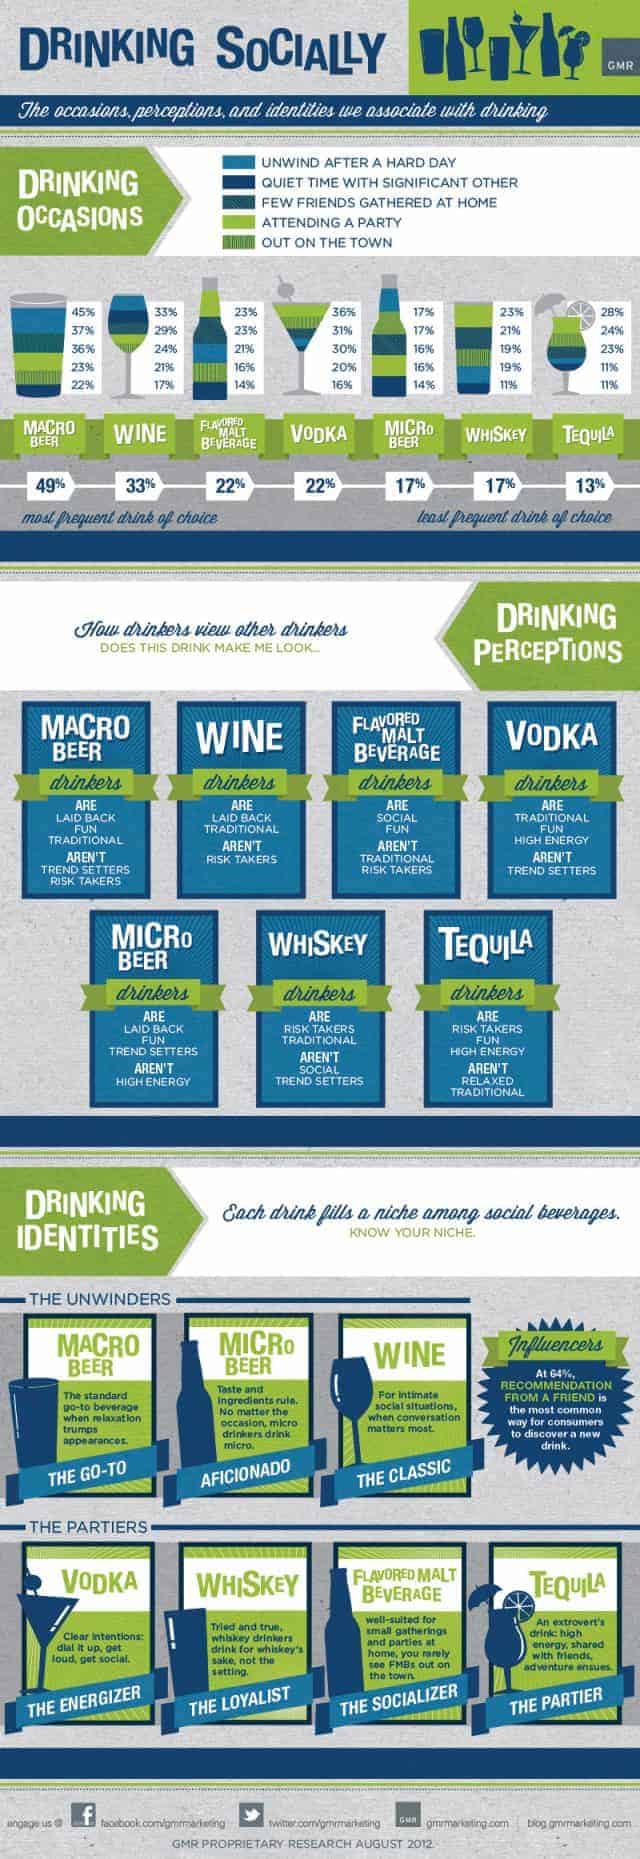 Drinking Socially Infographic